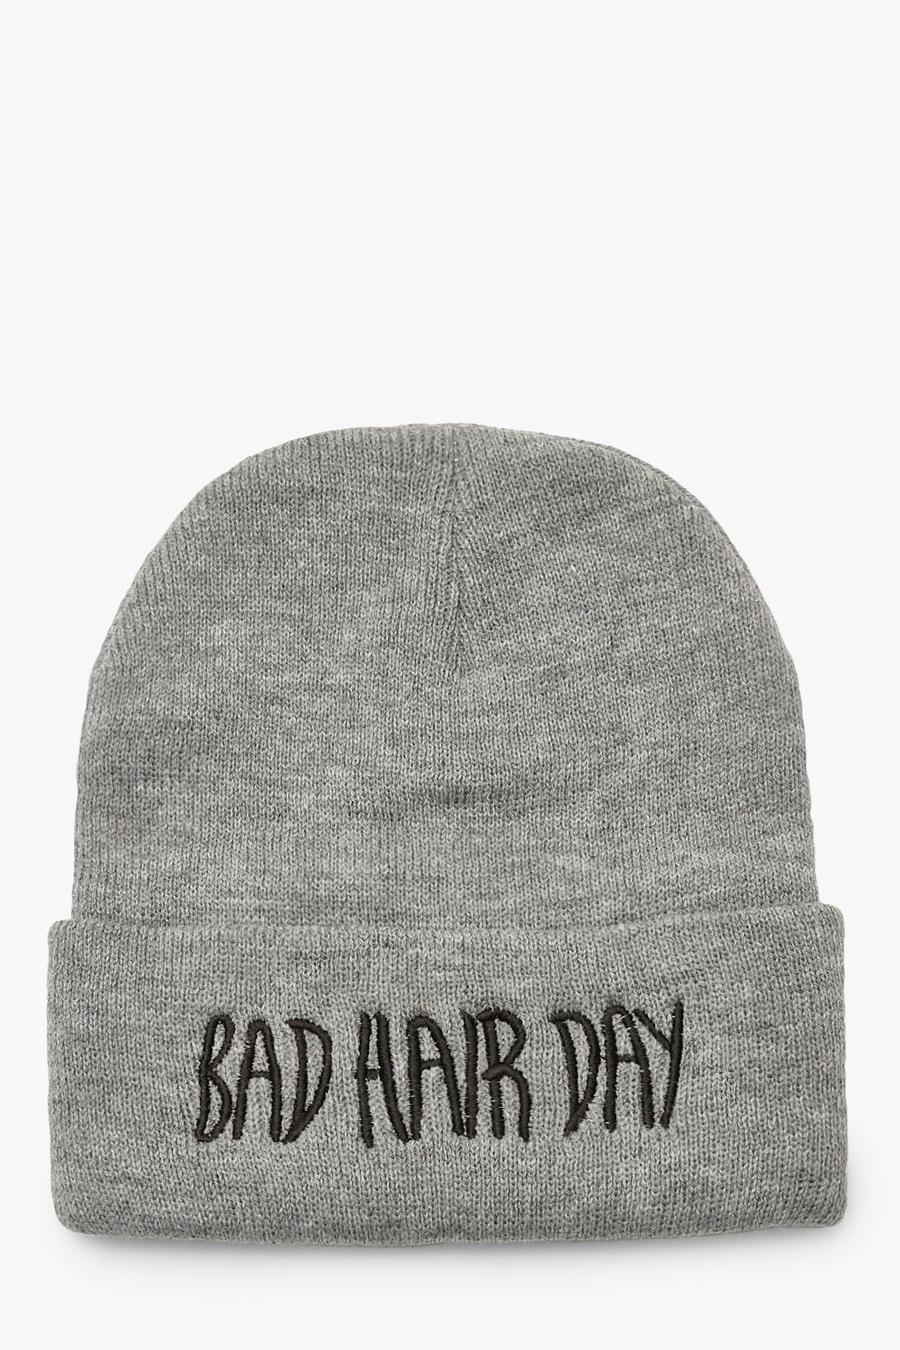 Bad Hair Day Beanies image number 1